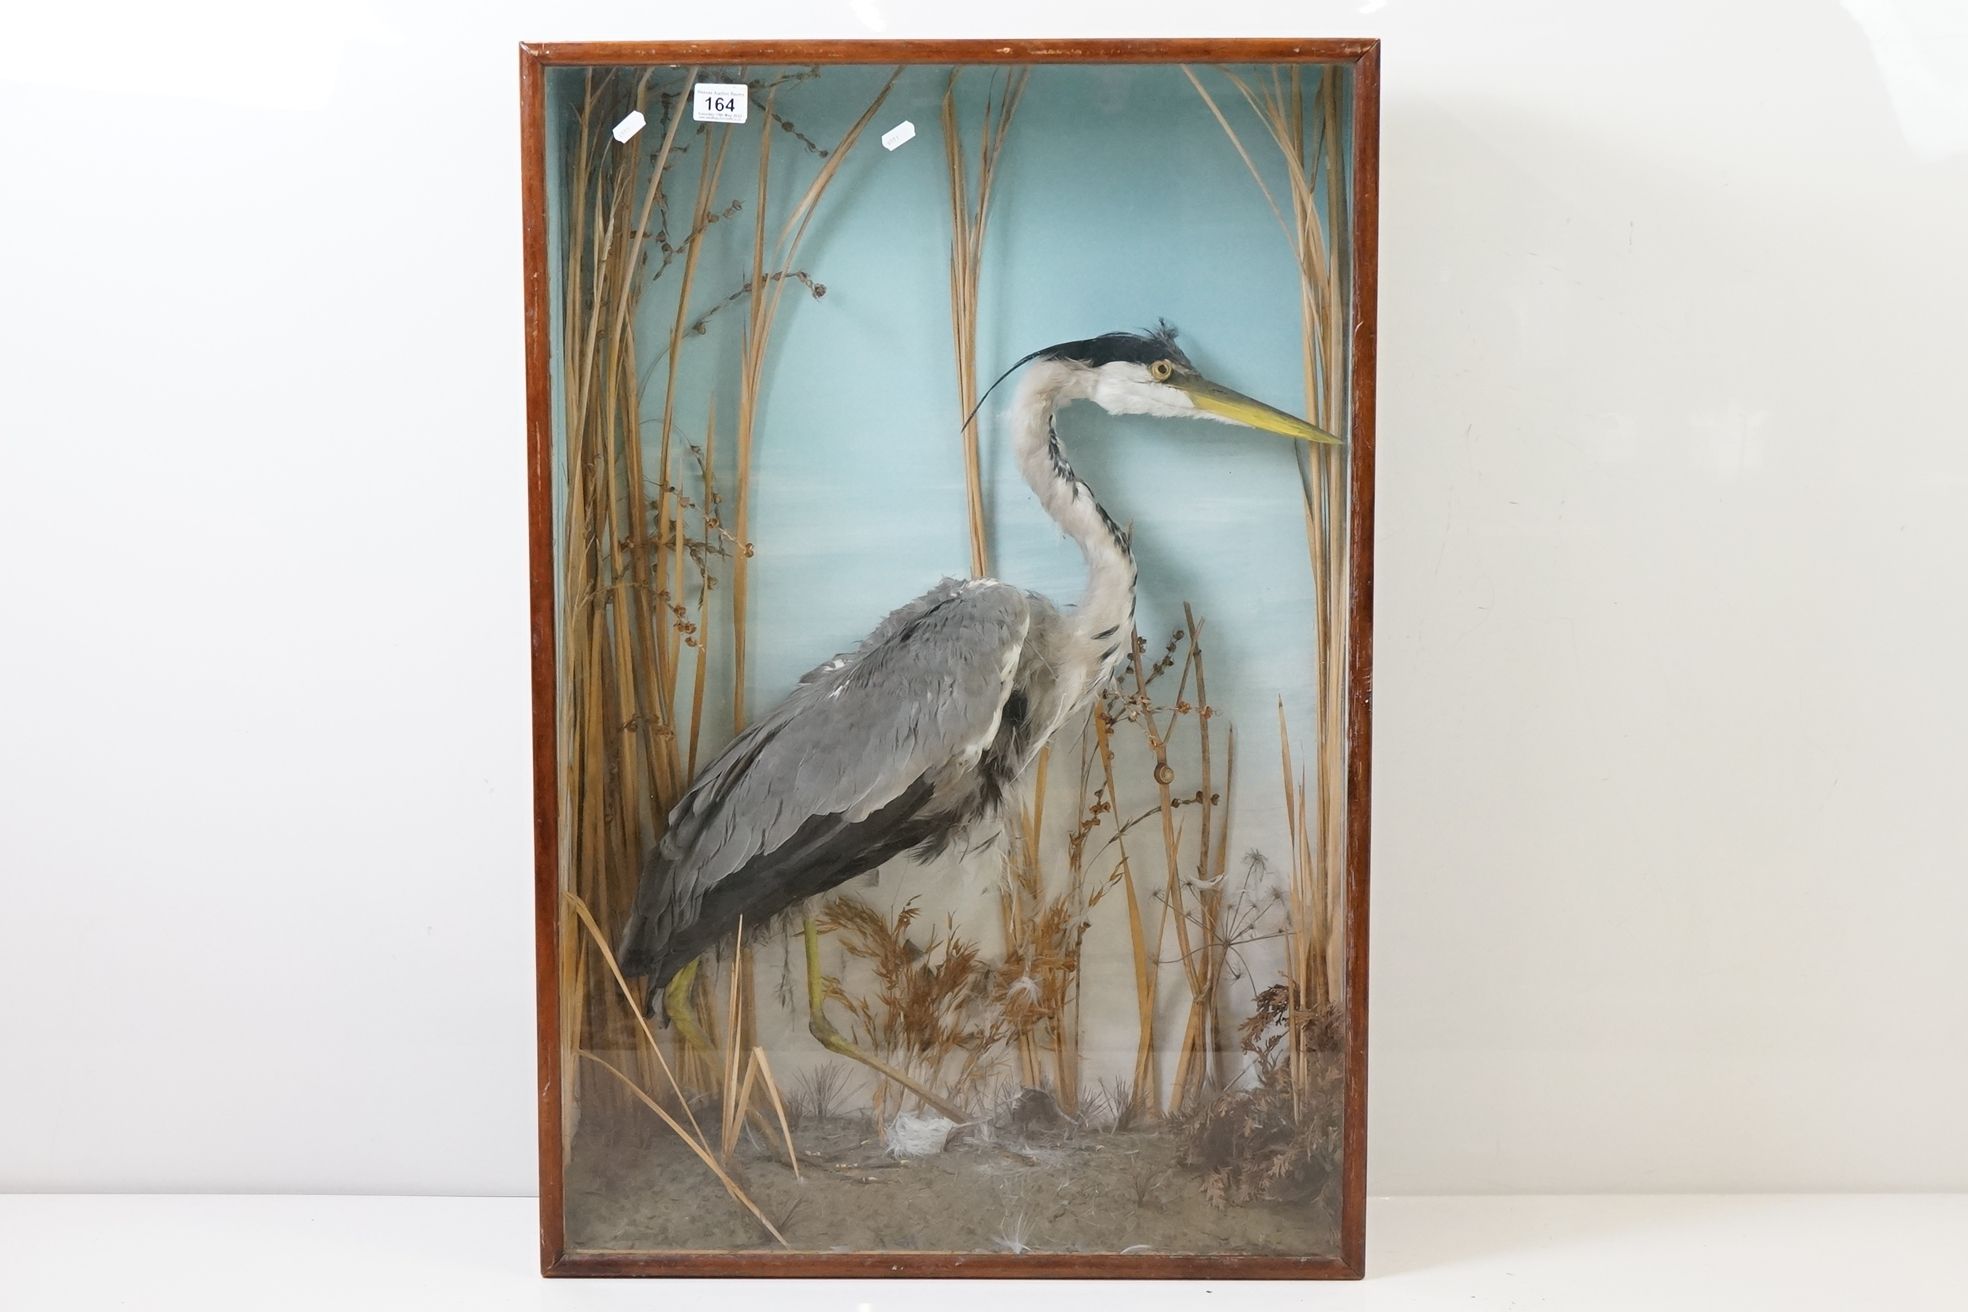 Taxidermy - Standing Heron mounted amongst natural foliage, contained in a glass fronted display